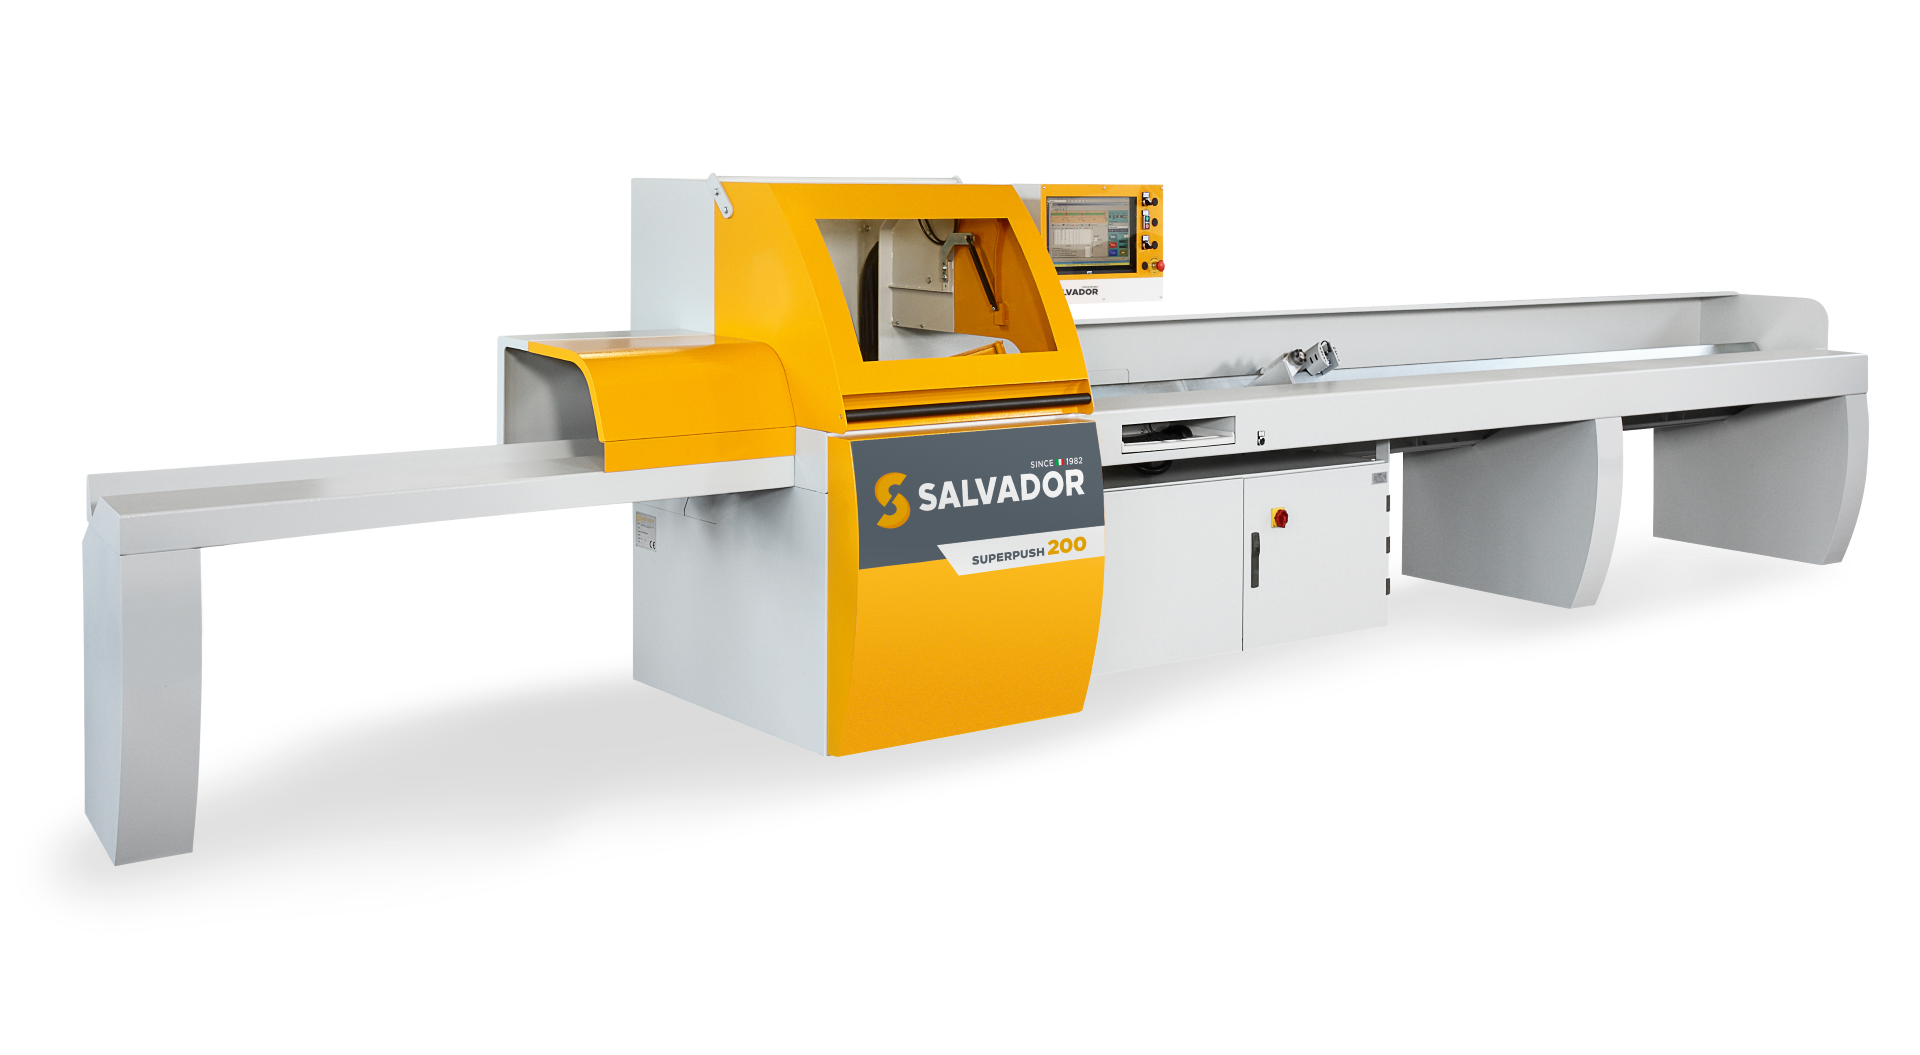 Automatic cross saw with the pusher - SALVADOR SuperPush 200